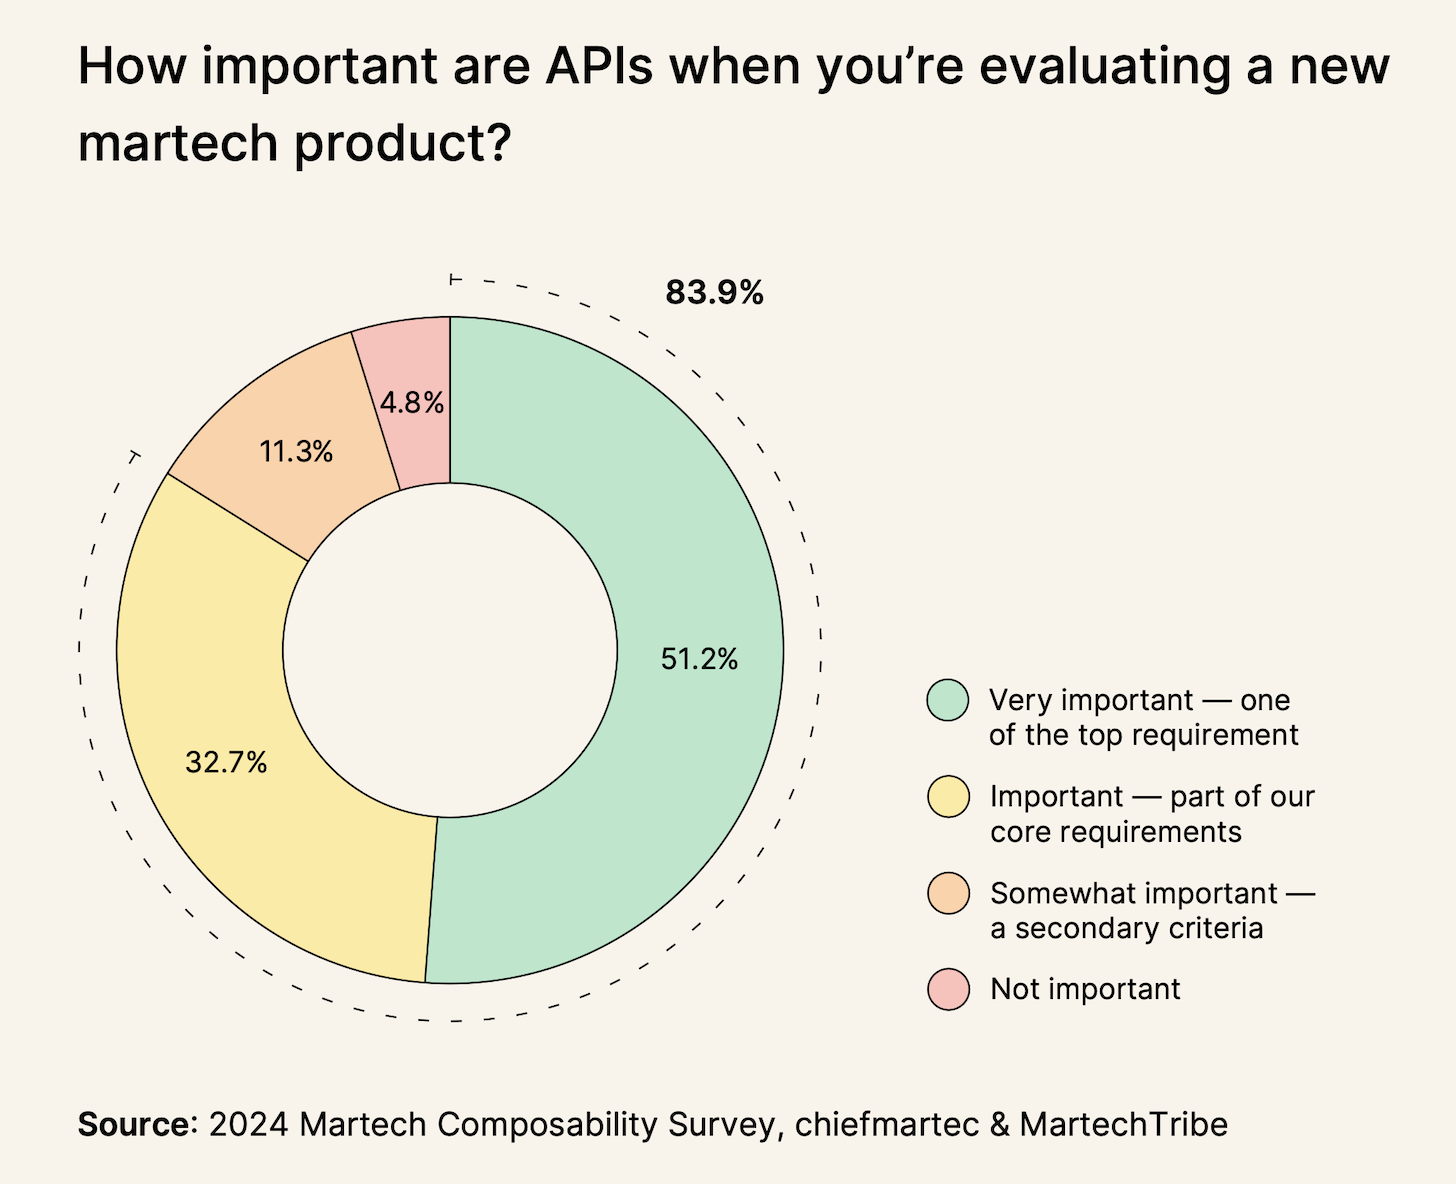 APIs Are Very Important in Martech